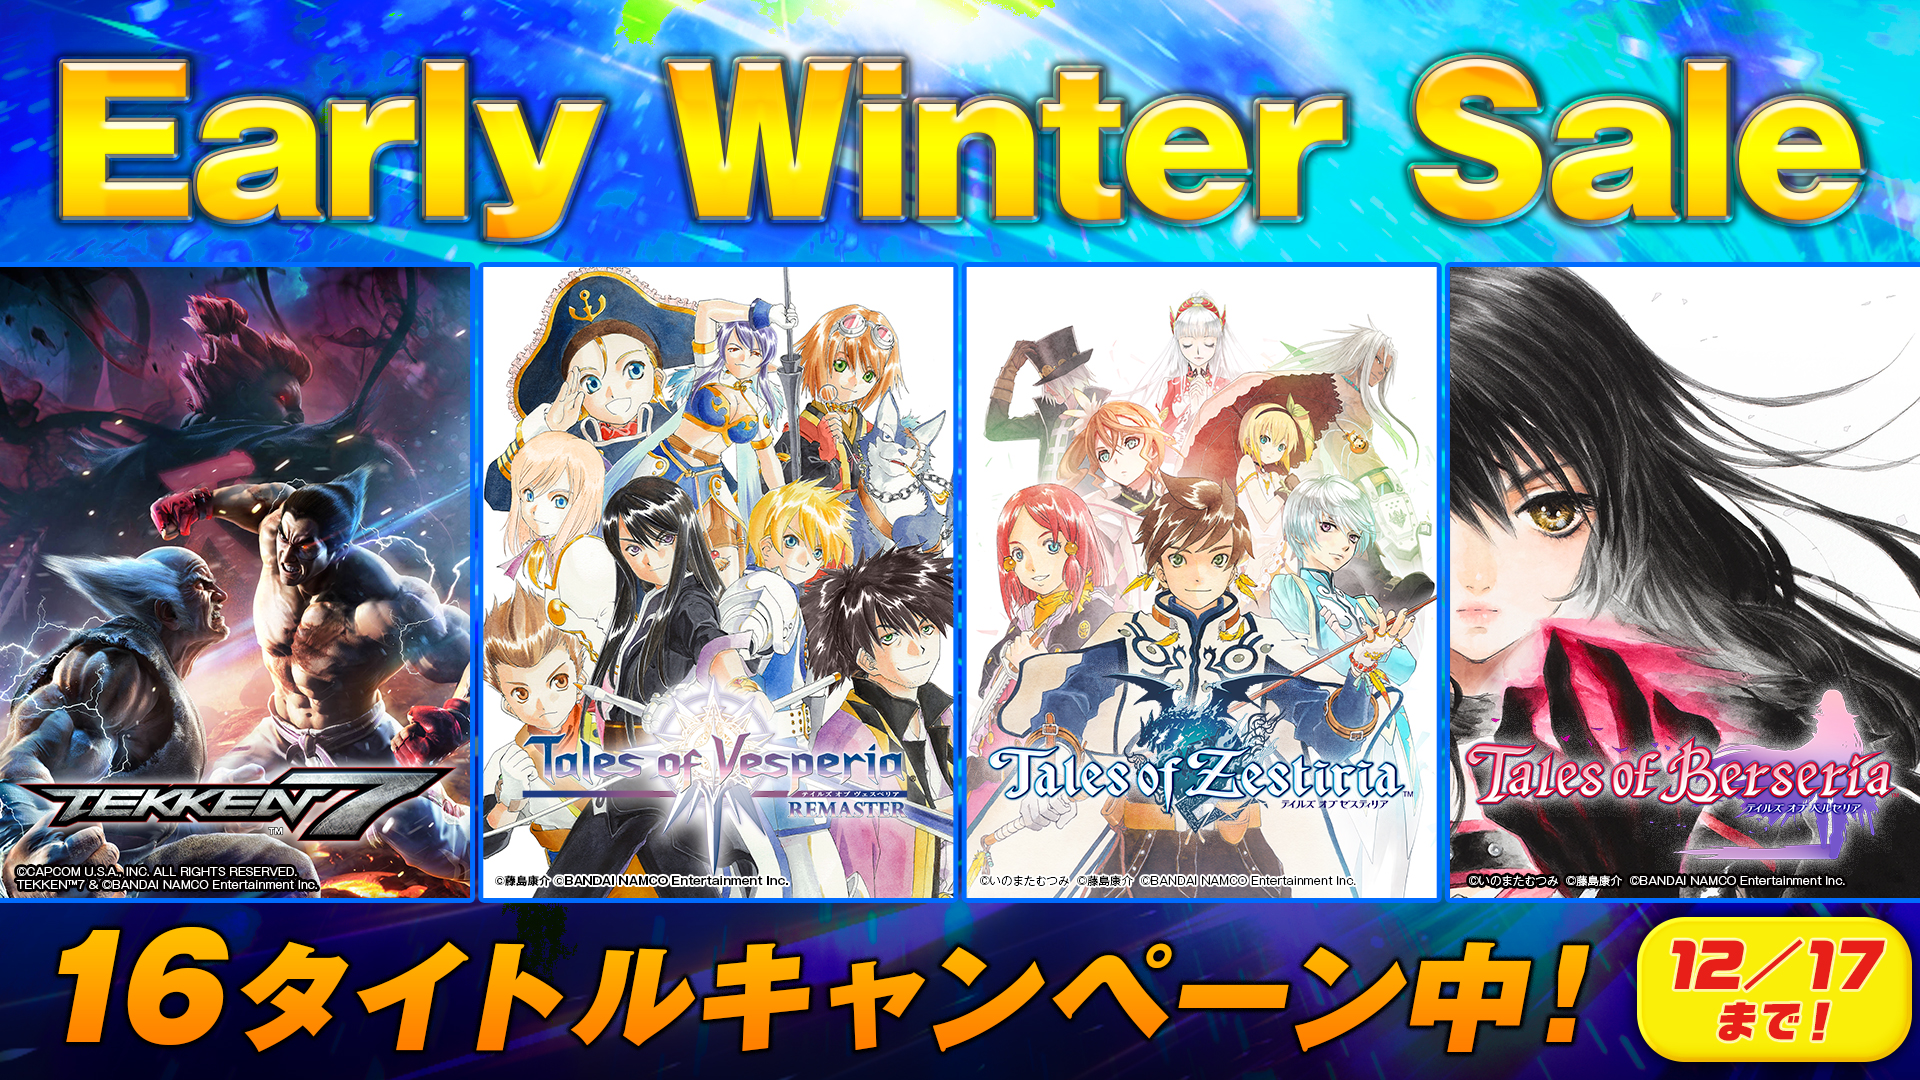 Ps Store Early Winter Sale にて 鉄拳 7 や テイルズ シリーズがセール対象に Game Watch